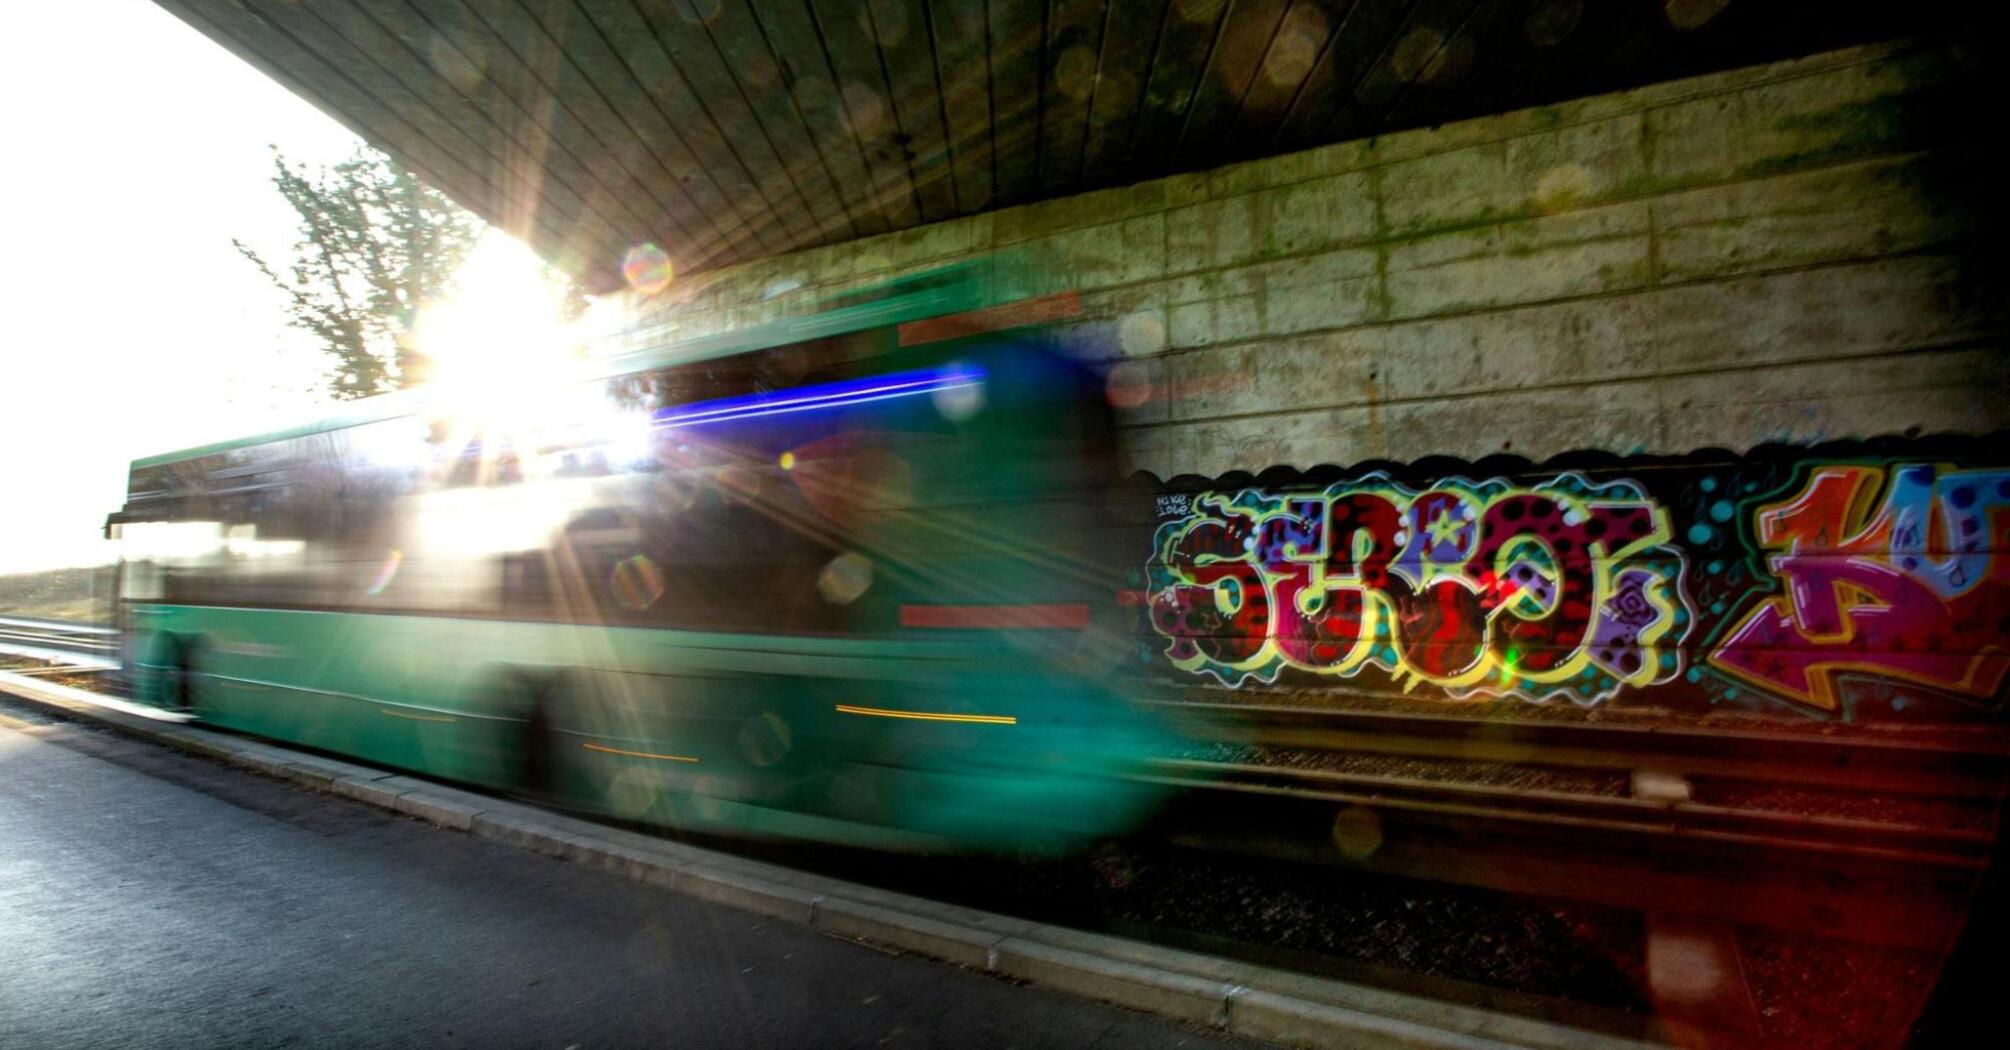 A green bus passes under a bridge with graffiti on the wall, sunlight shining through